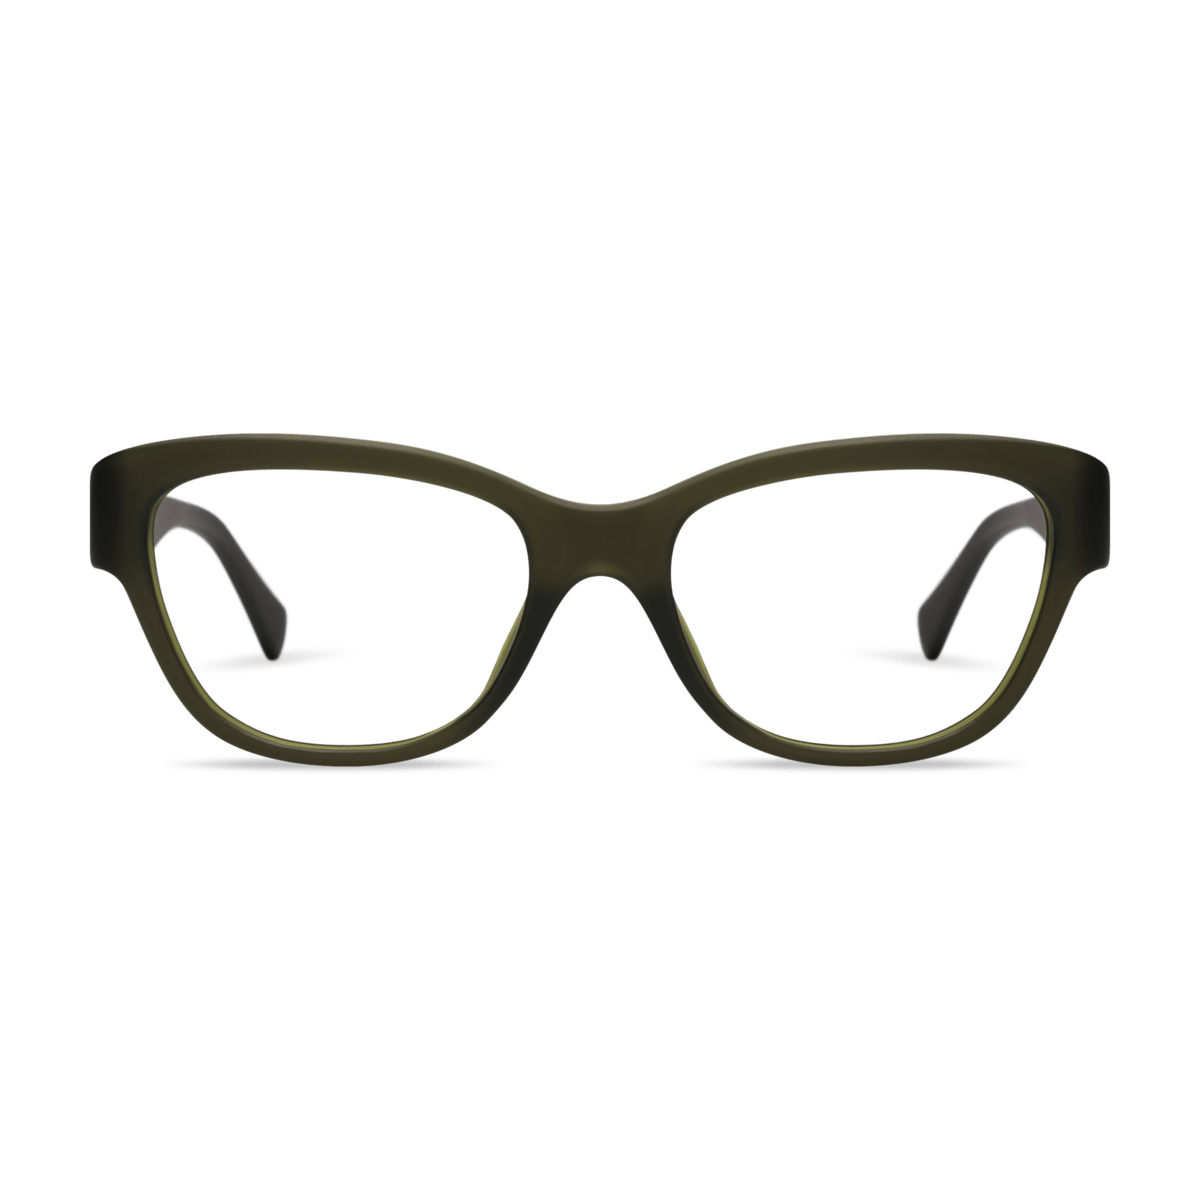 Milla Readers READING GLASSES LOOK OPTIC (Forest Green) +1.00 